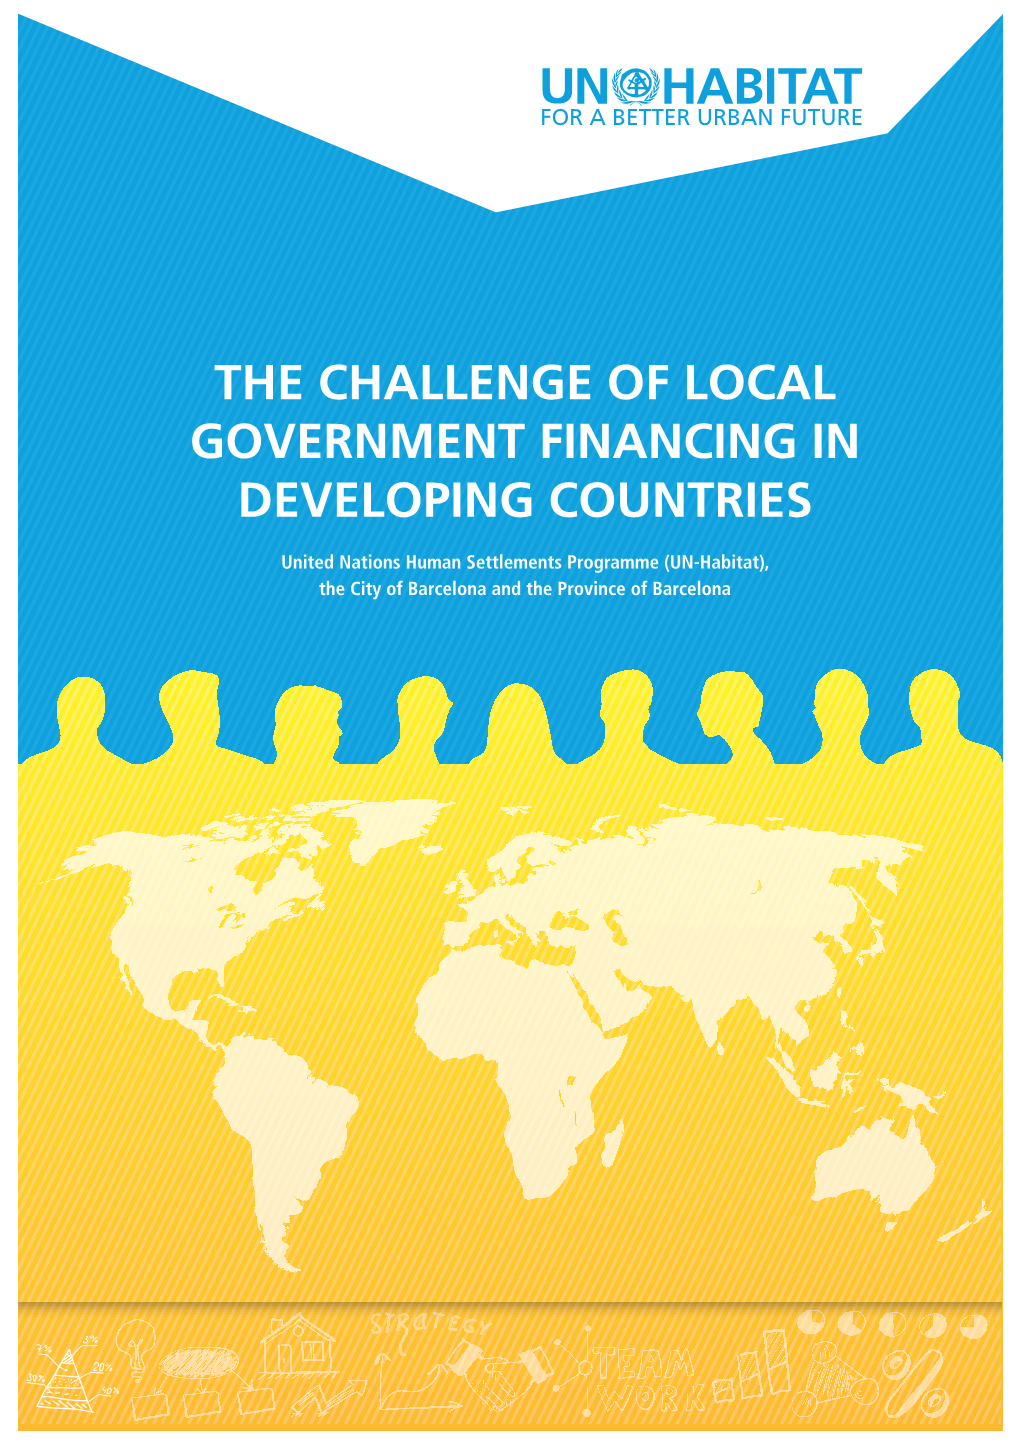 The Challenge of Local Government Financing in Developing Countries